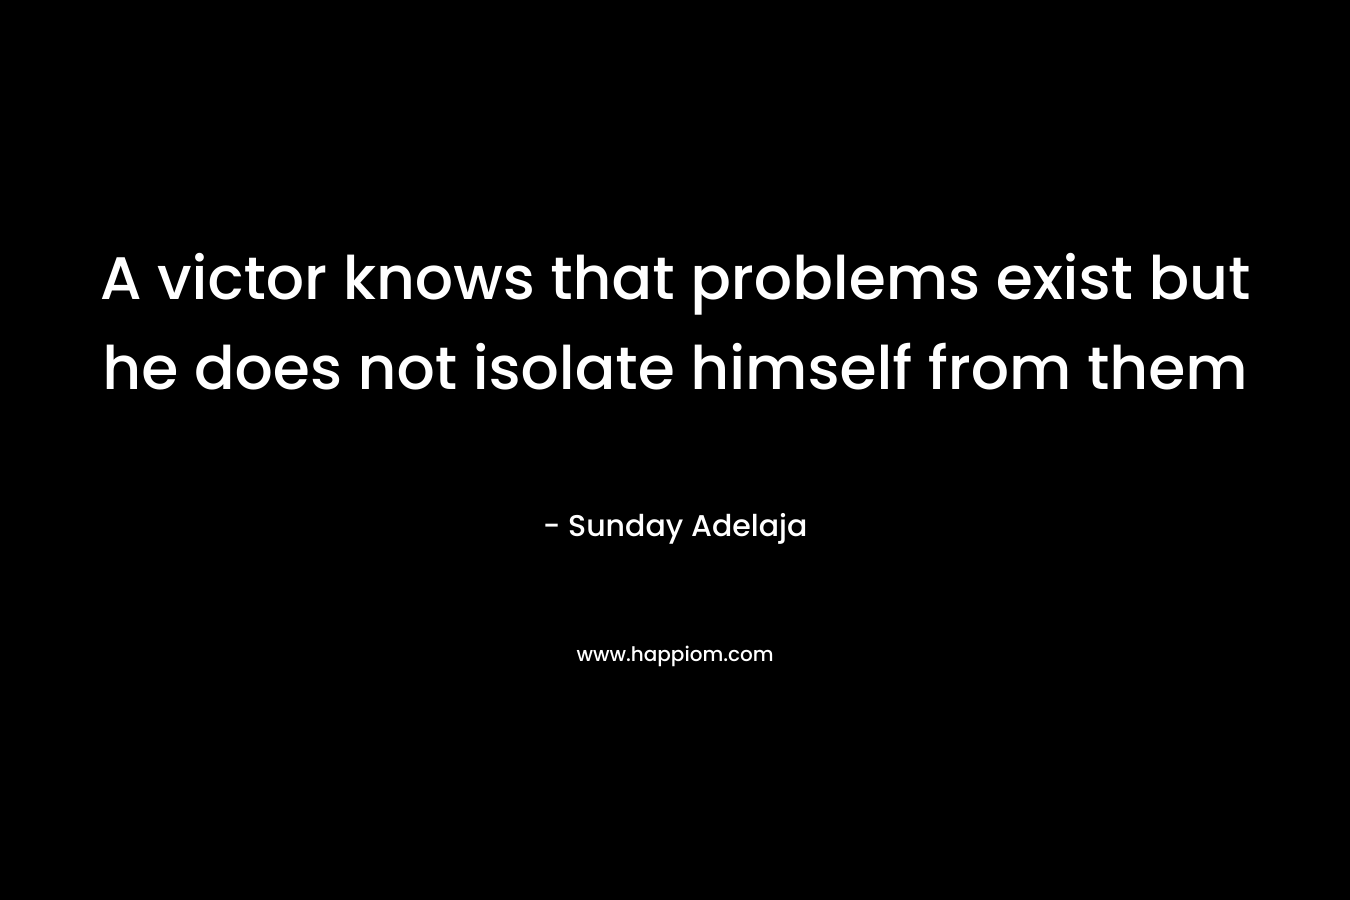 A victor knows that problems exist but he does not isolate himself from them